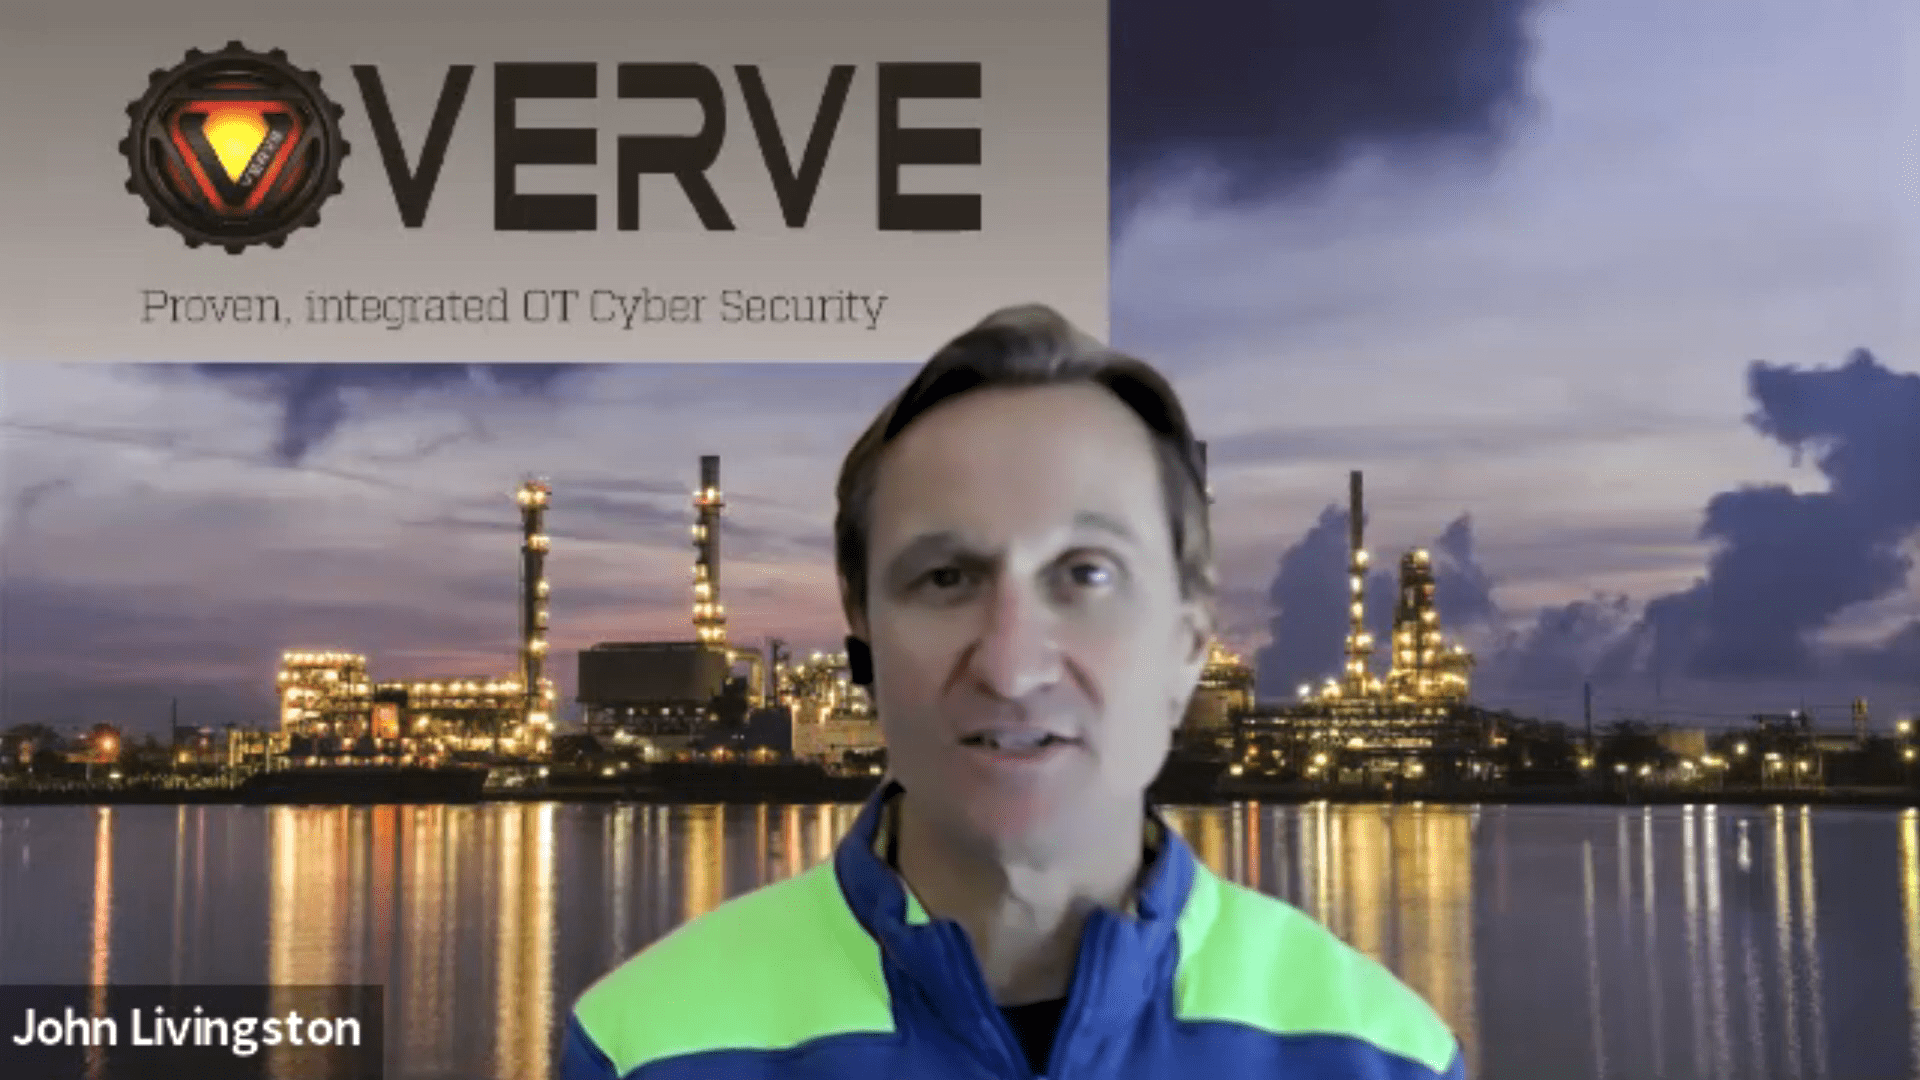 Verve Industrial CEO John Livingston discusses increasing industrial cybersecurity threat